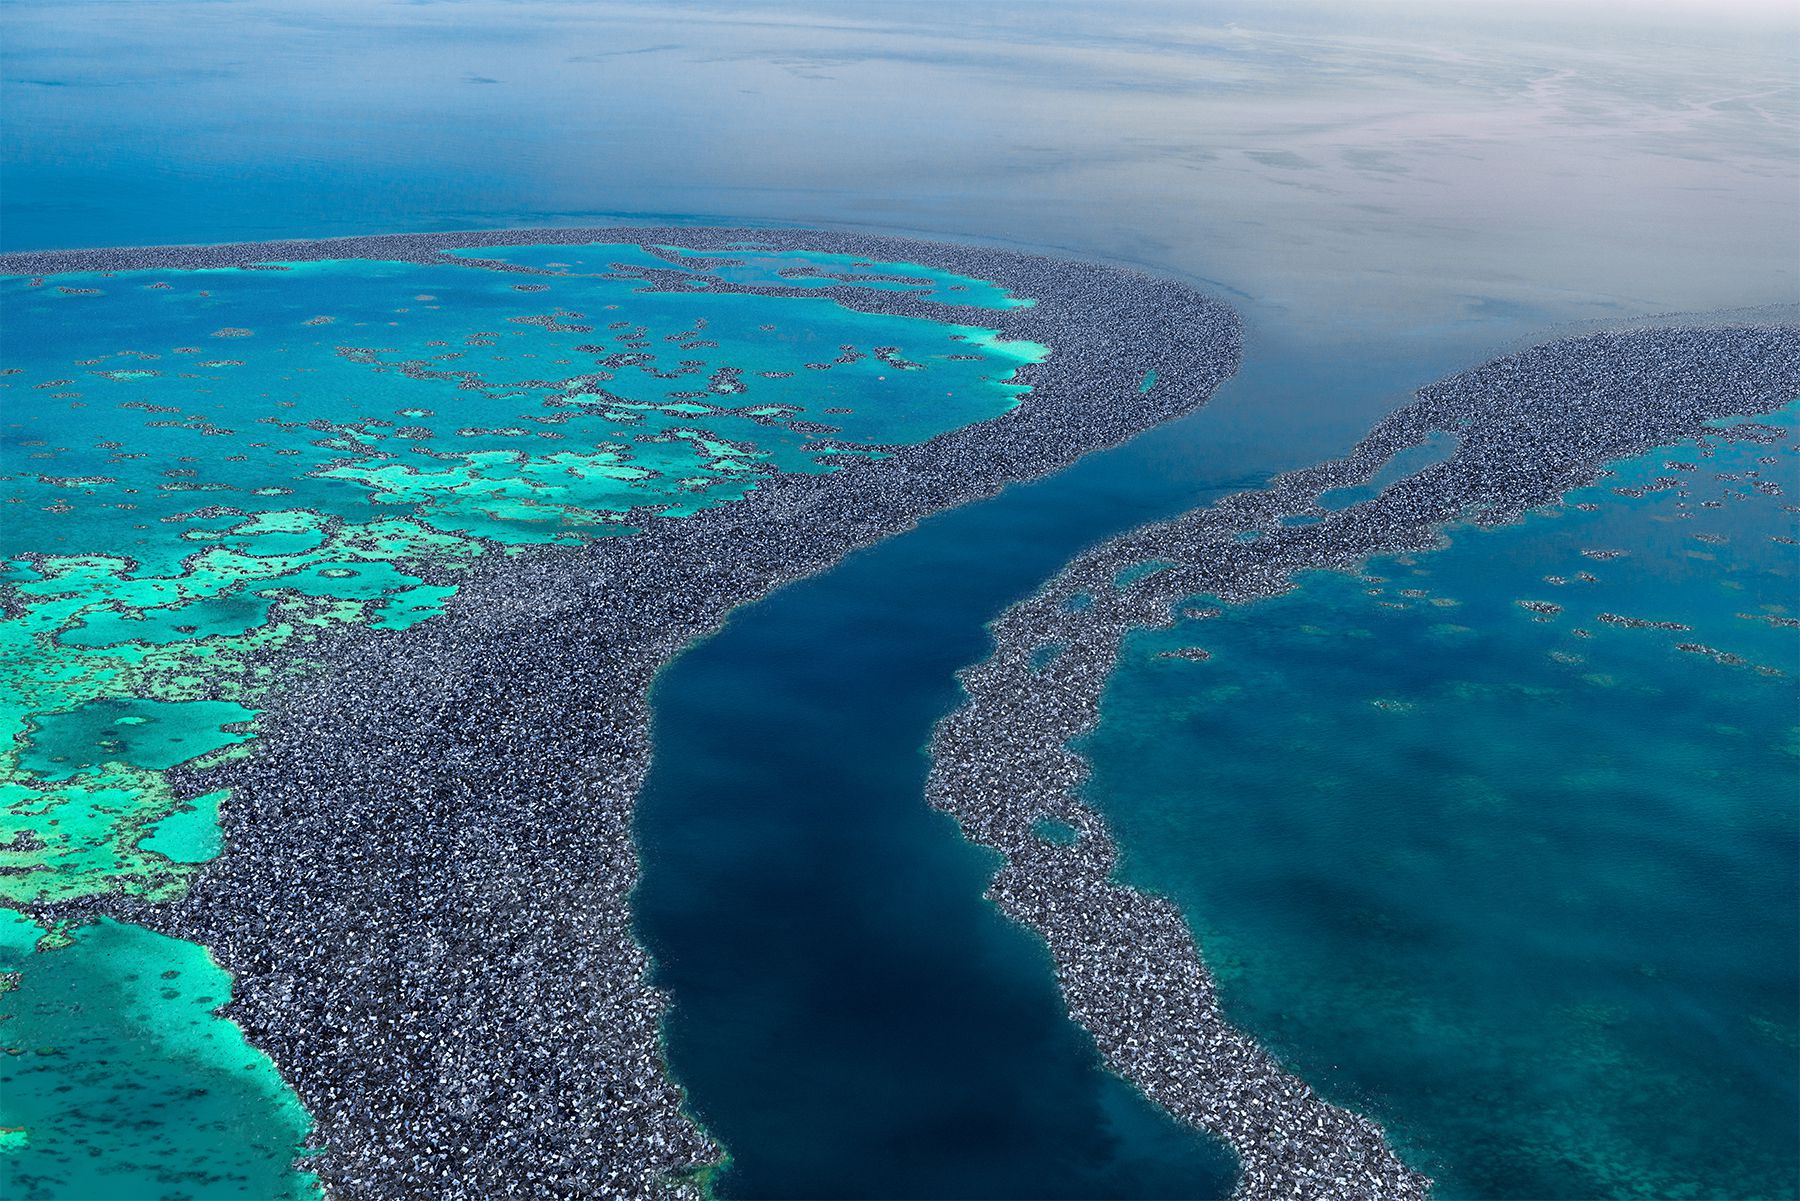 The Great Barrier Reef after